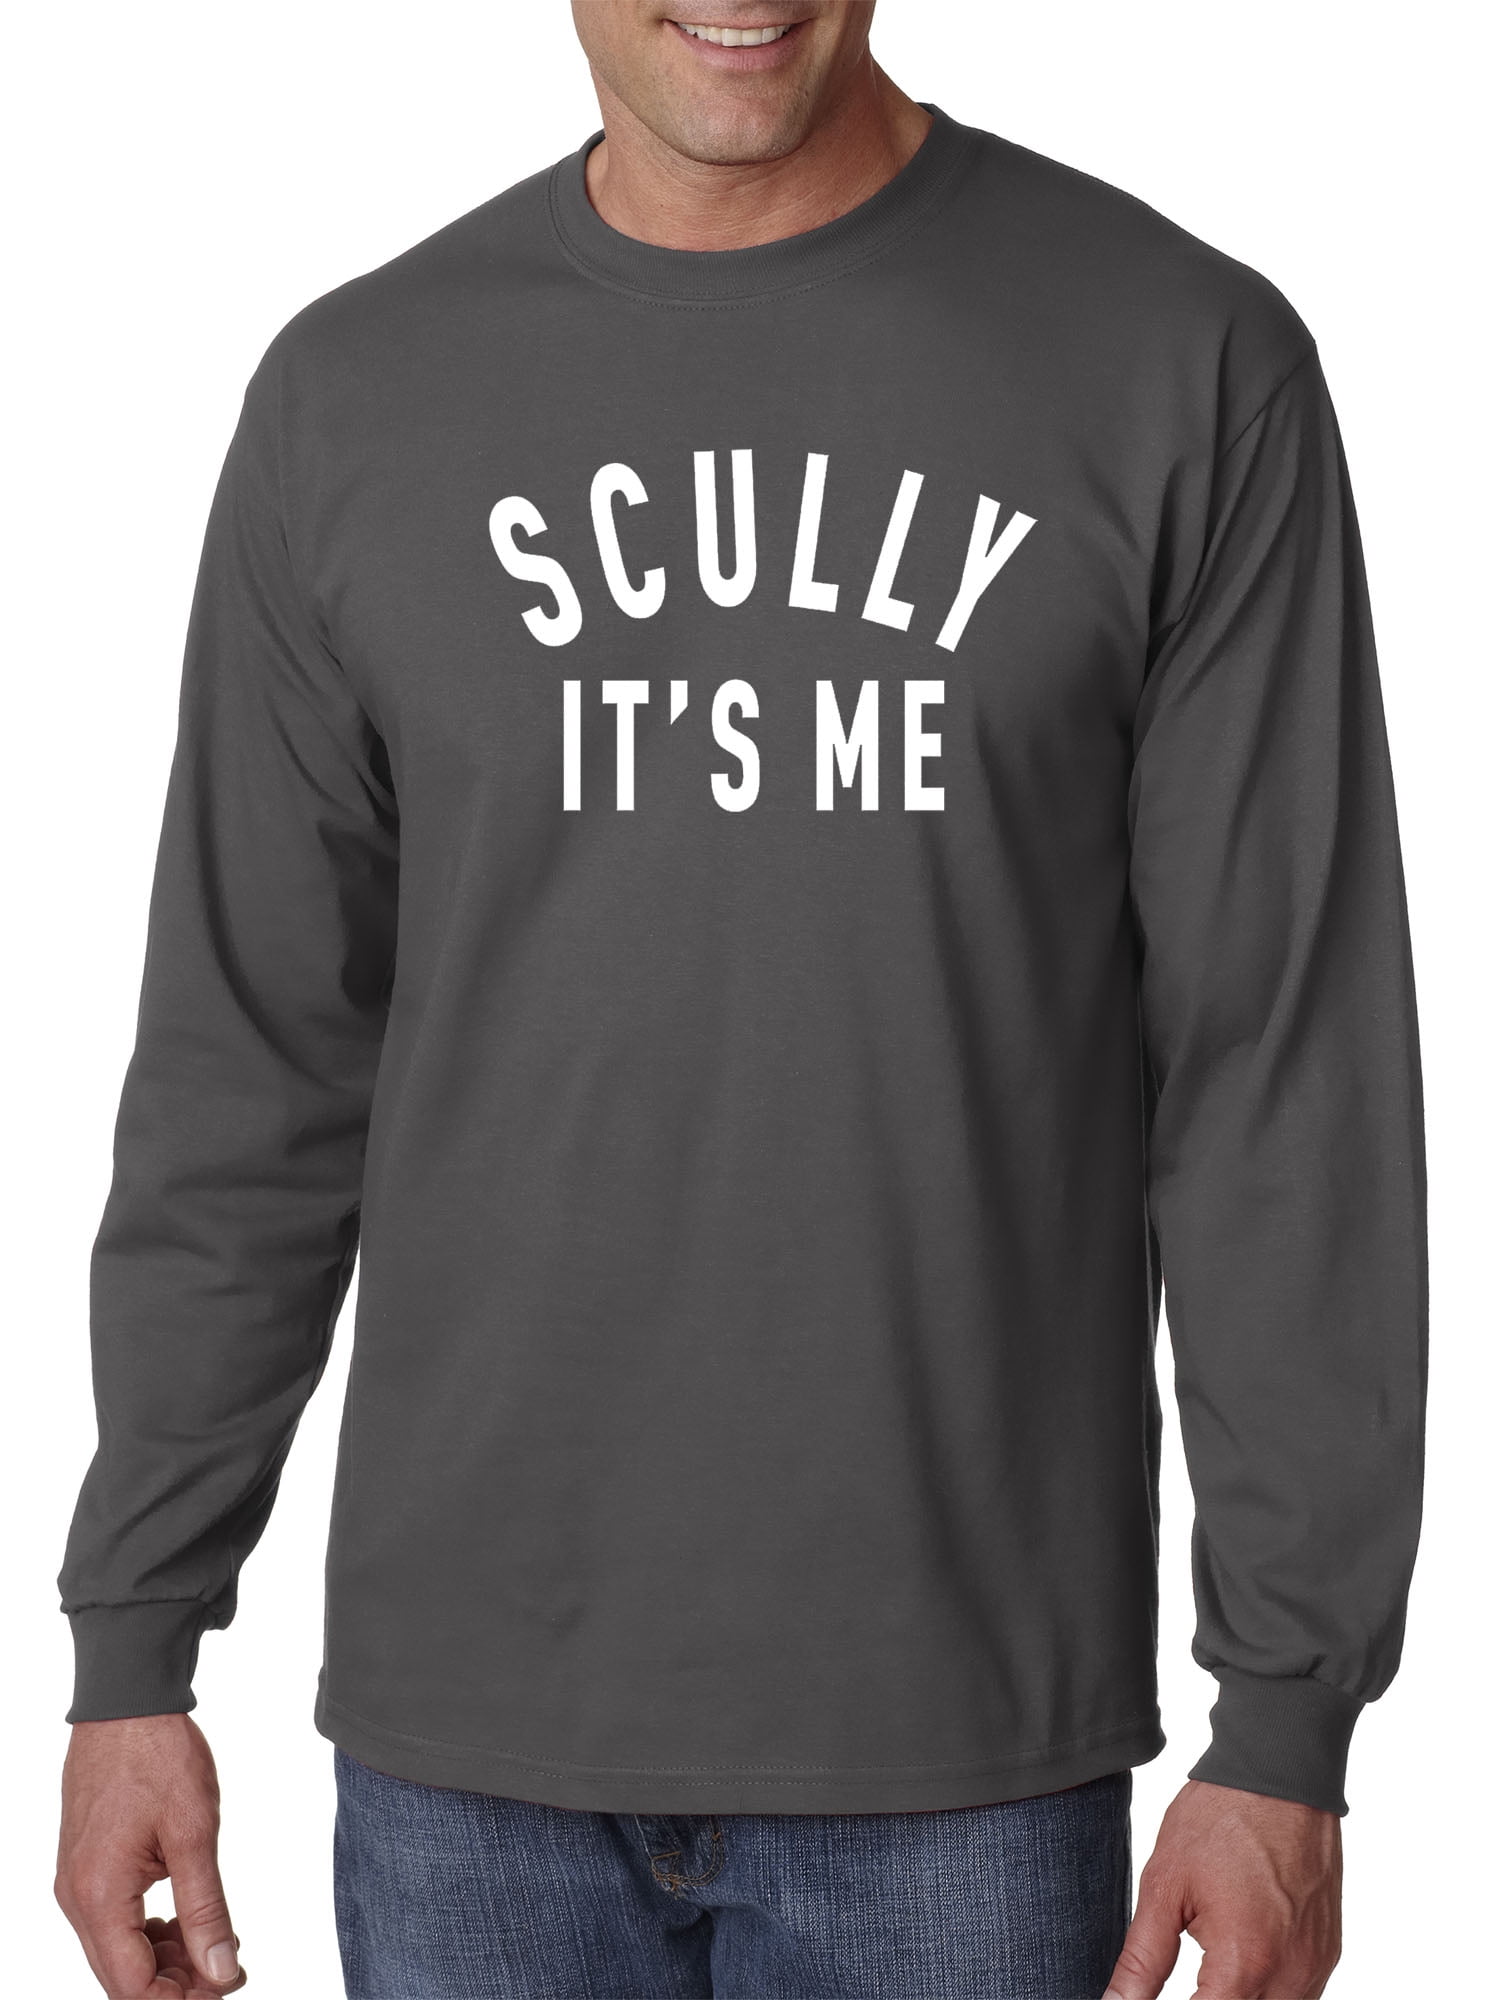 scully shirts near me